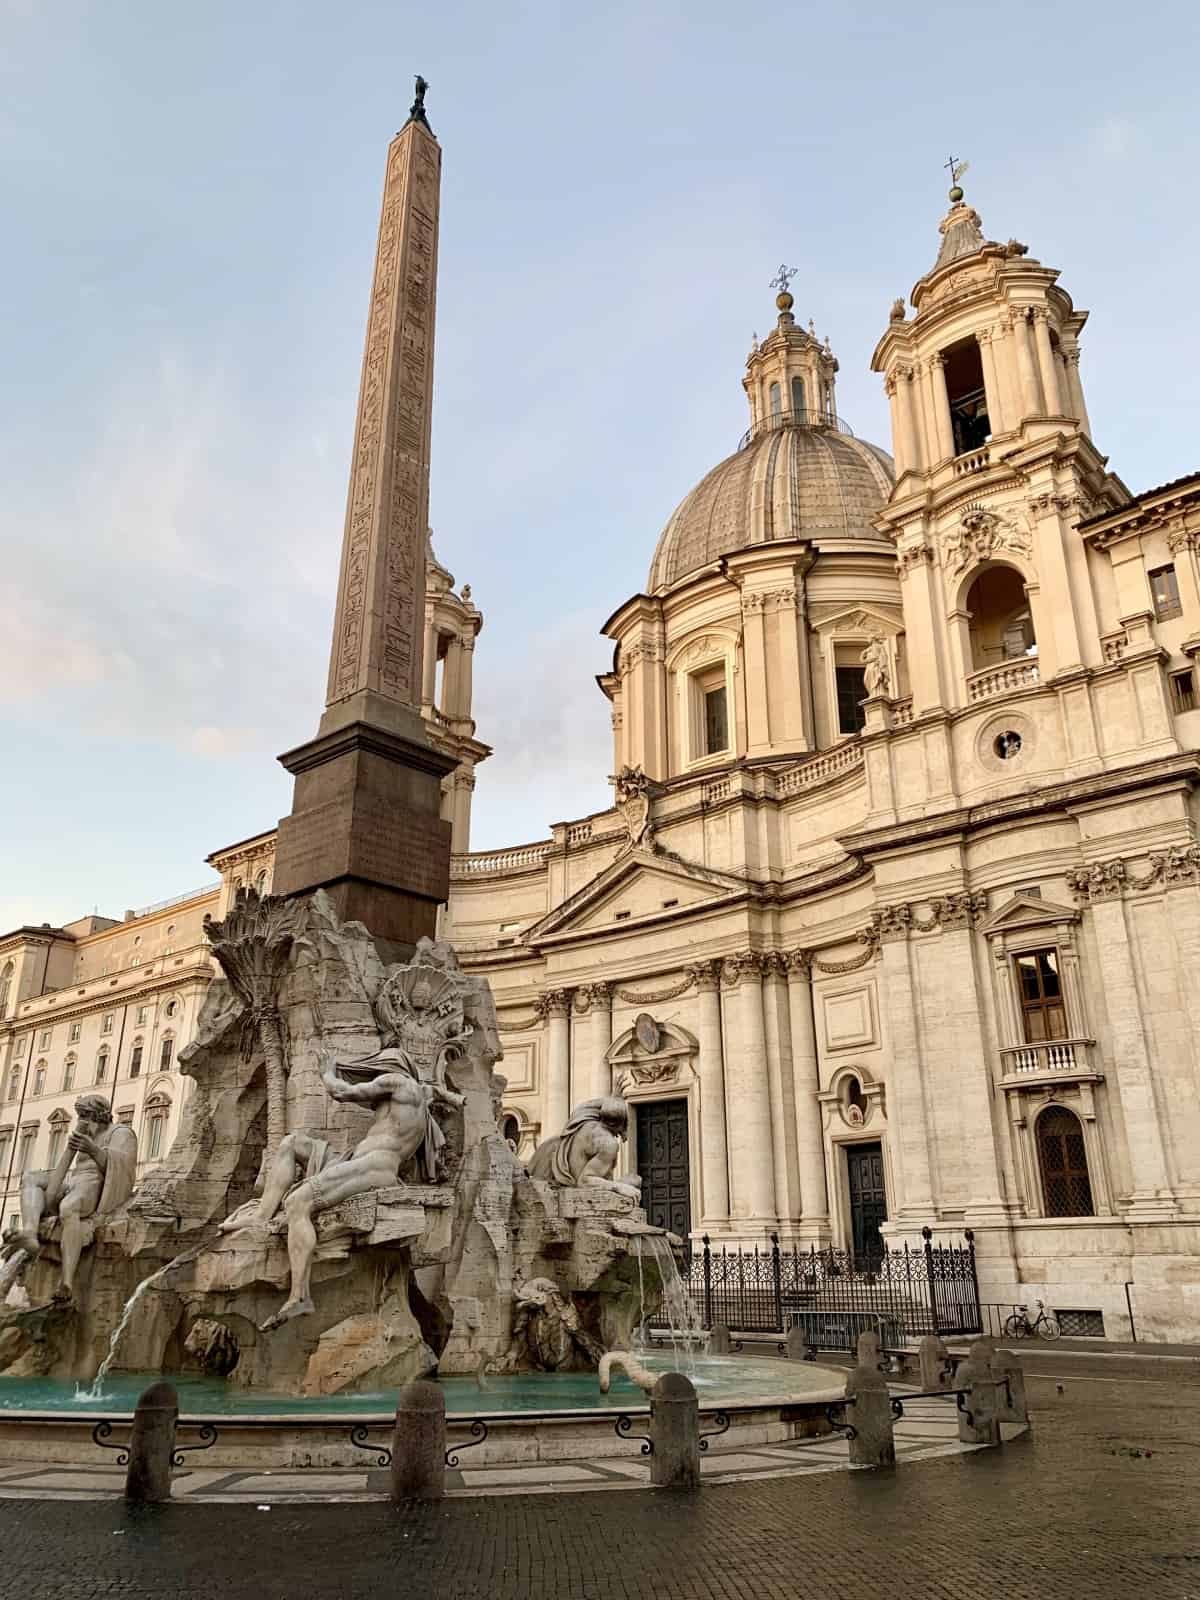 A First-Timer's Guide to Rome | A super detailed travel guide to the Eternal City, what to do in Rome whether you have one day or a week...things to do in Rome, what to see and what to skip, where to eat, sunset and sunrise Rome ideas, and more. Italy travel tips, Rome itinerary ideas, and Rome for solo travelers. Should you visit the Colosseum, Vatican Museum, Spanish Steps, & more! #rome #italy 